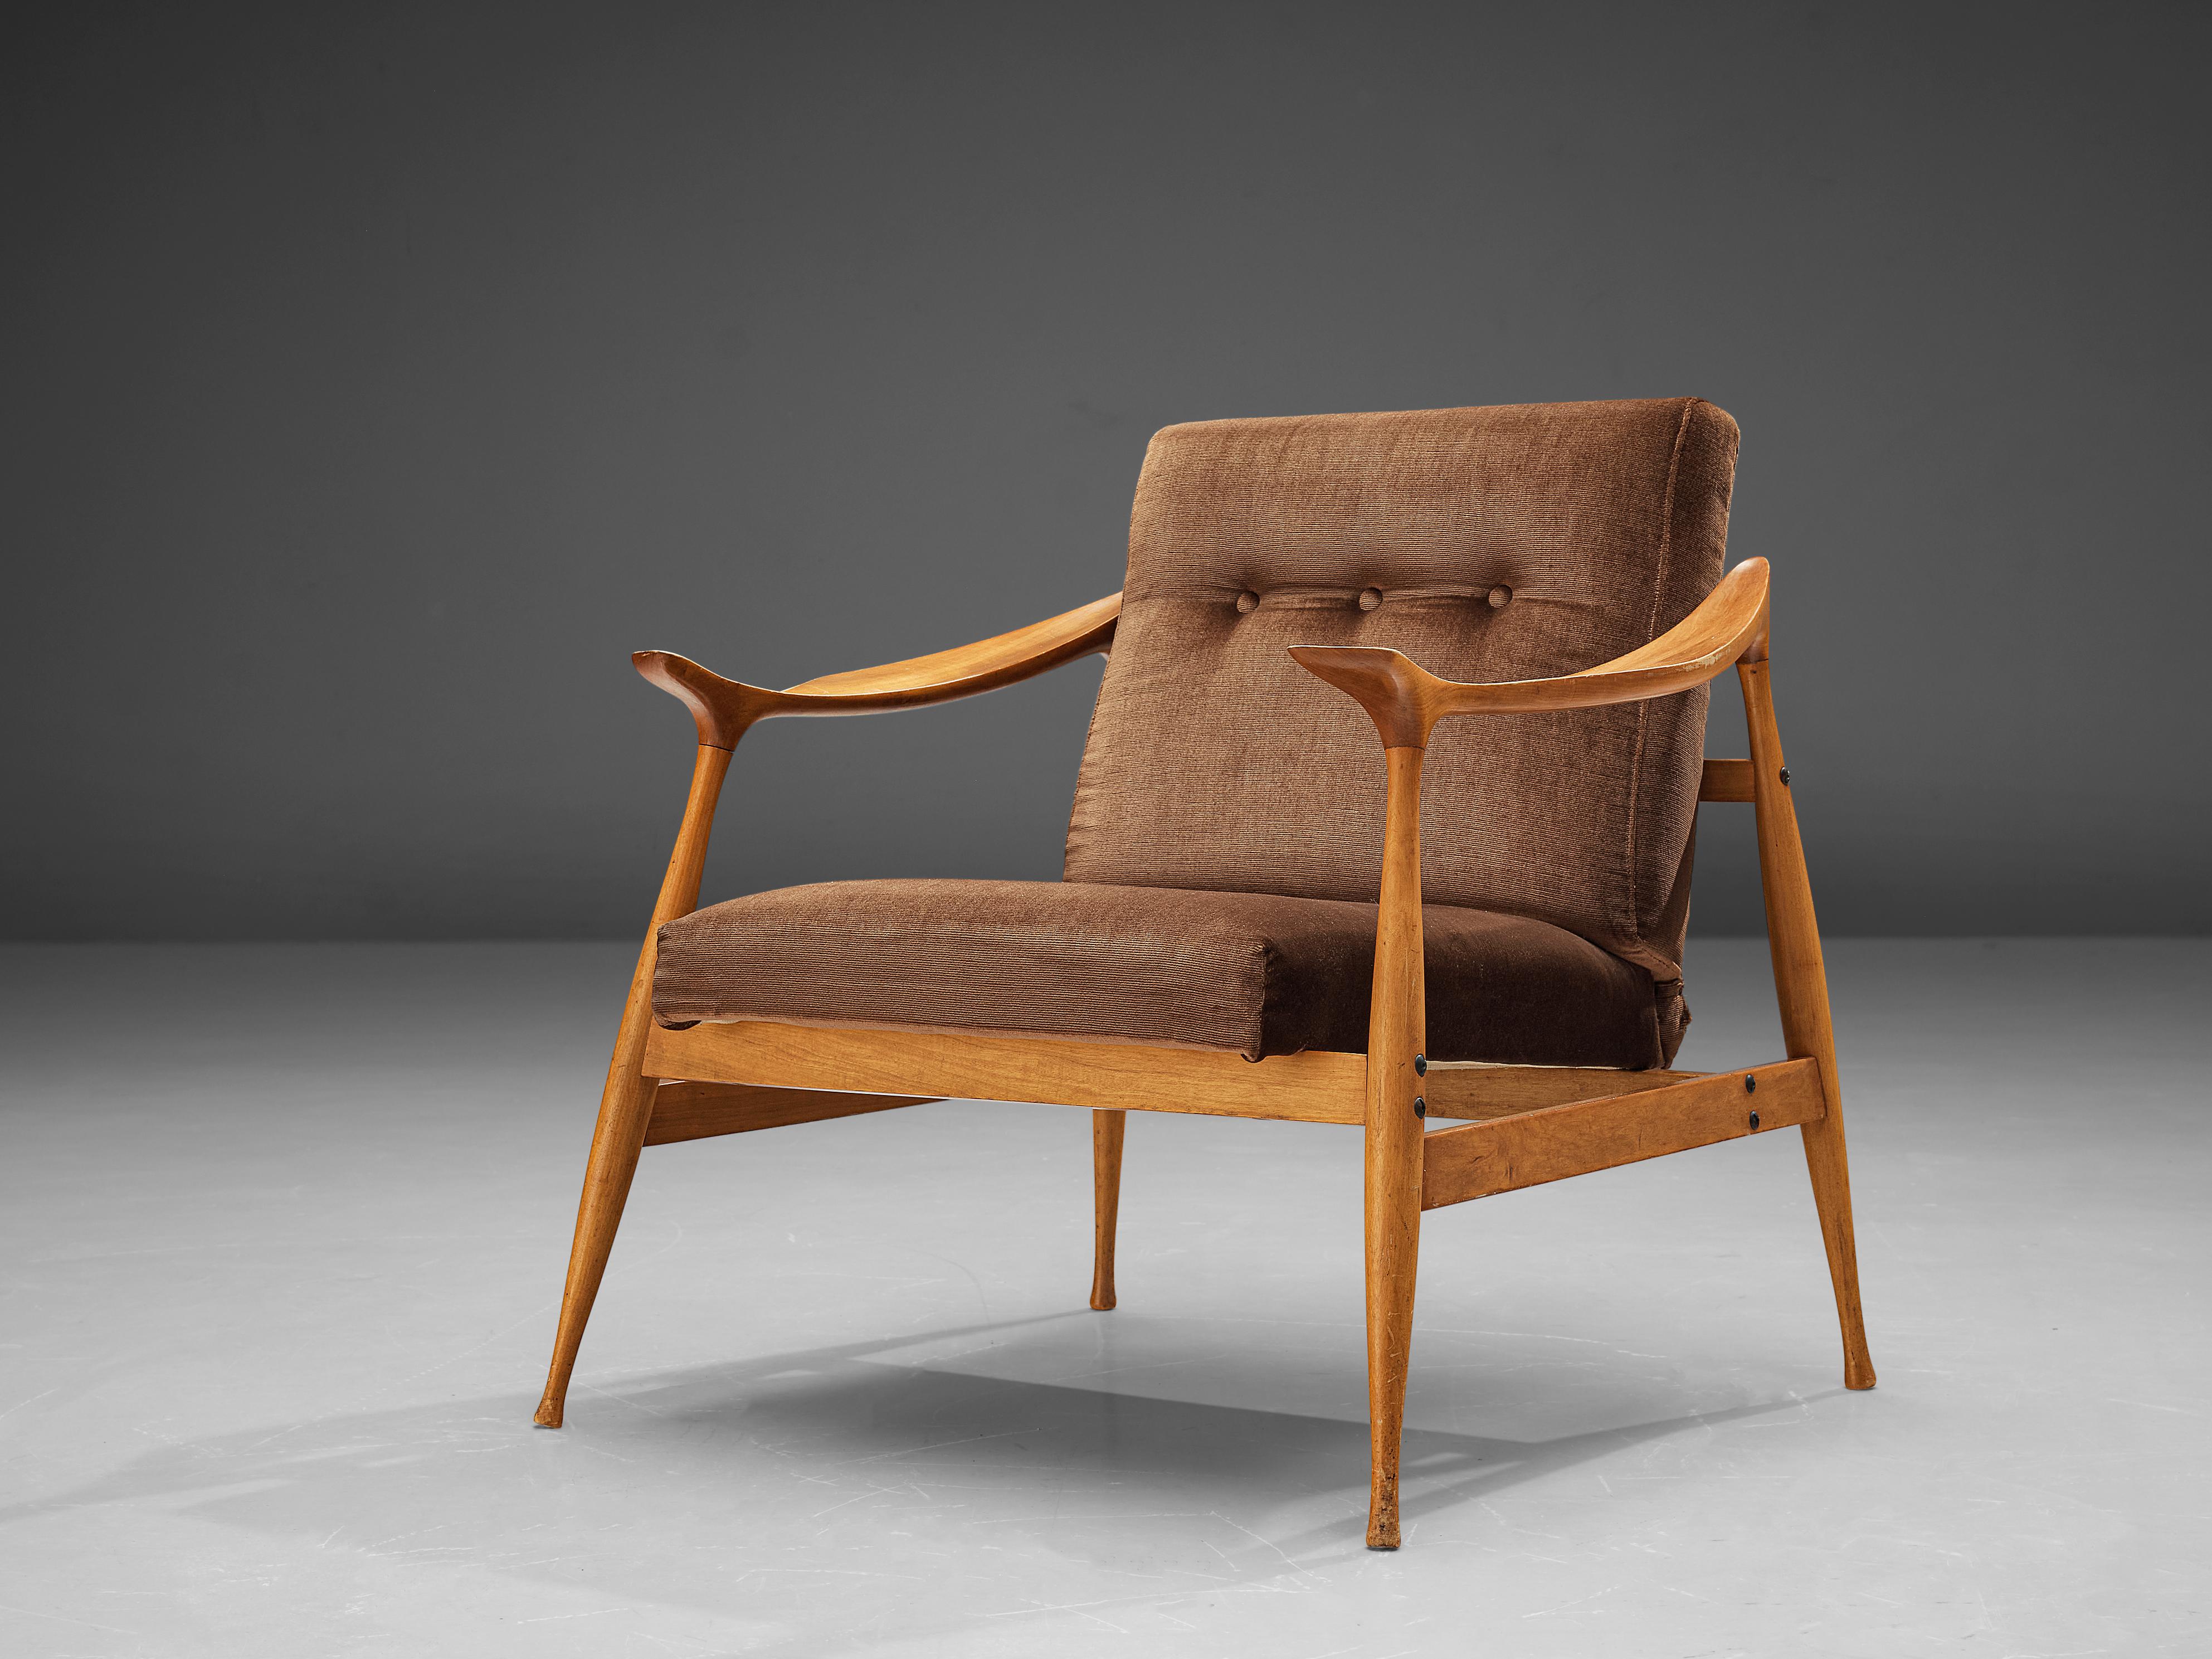 Fratelli Reguitti, lounge chair model 'Lord', walnut, velvet upholstery, Italy, designed in 1959

Beautiful lounge chair in solid walnut by Fratelli Reguitti. The wooden frame has a beautiful detailed and organic shaped design. The high cylindrical